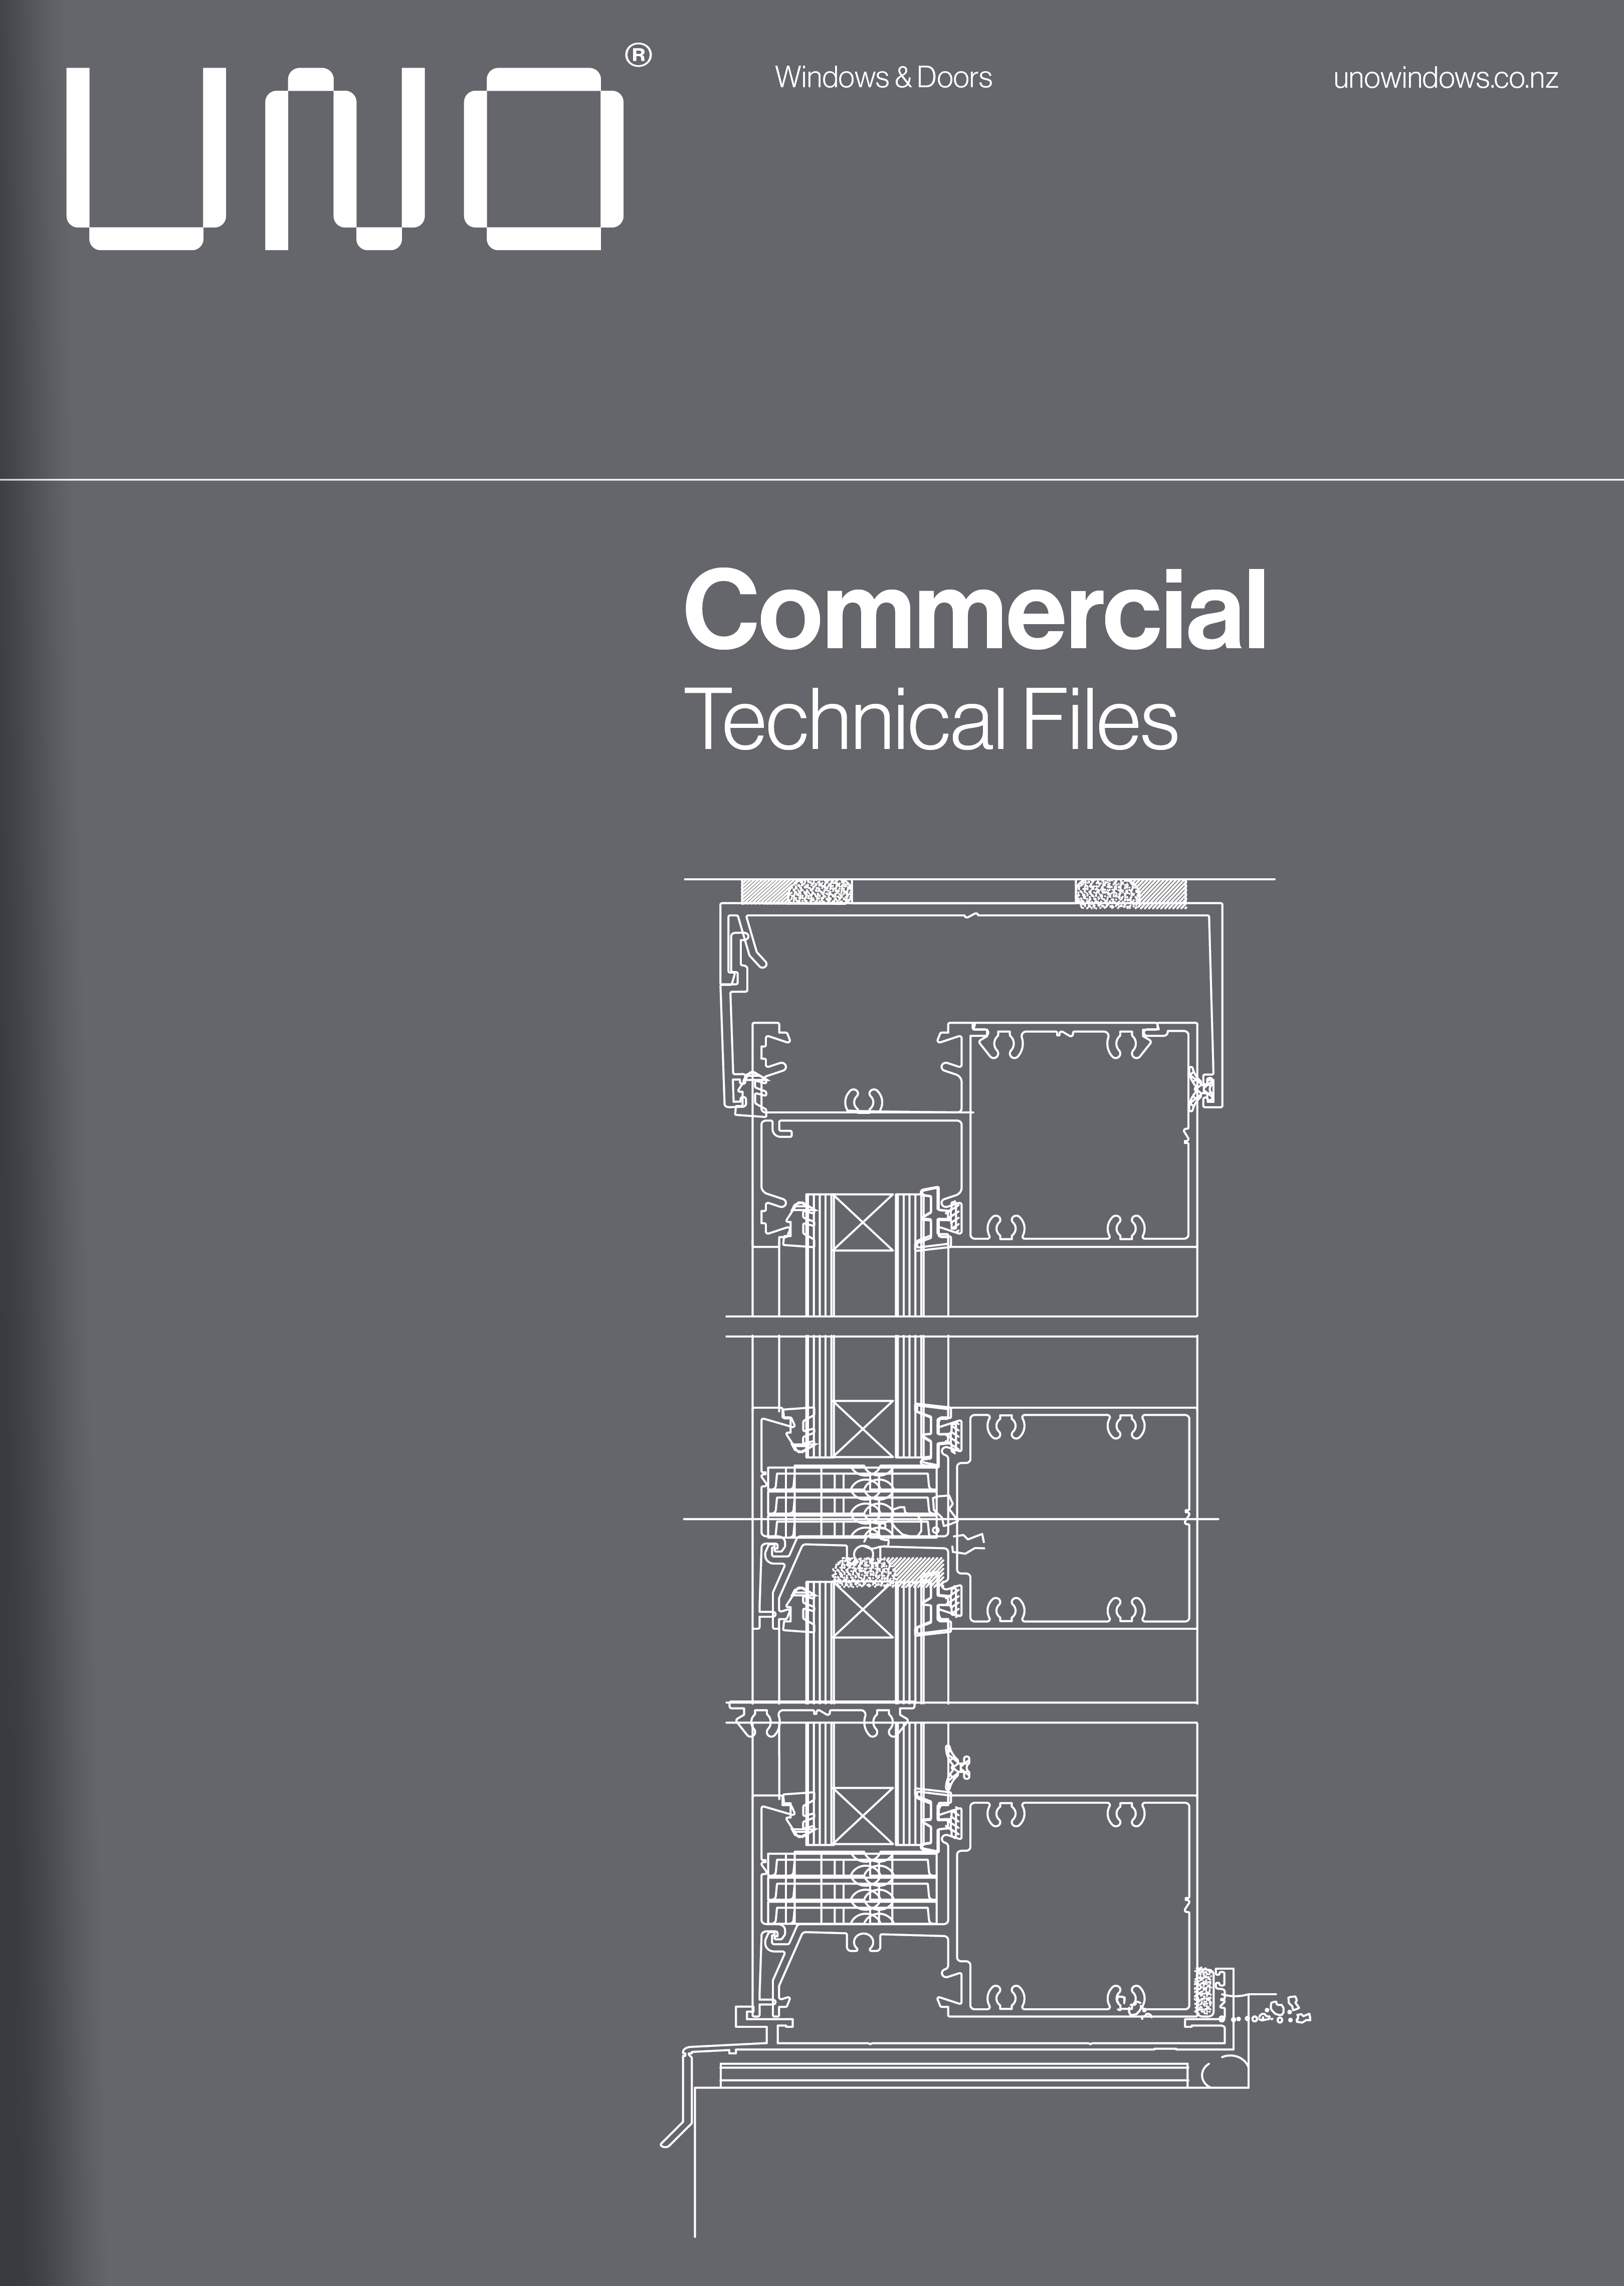 Download the commercial technical files 